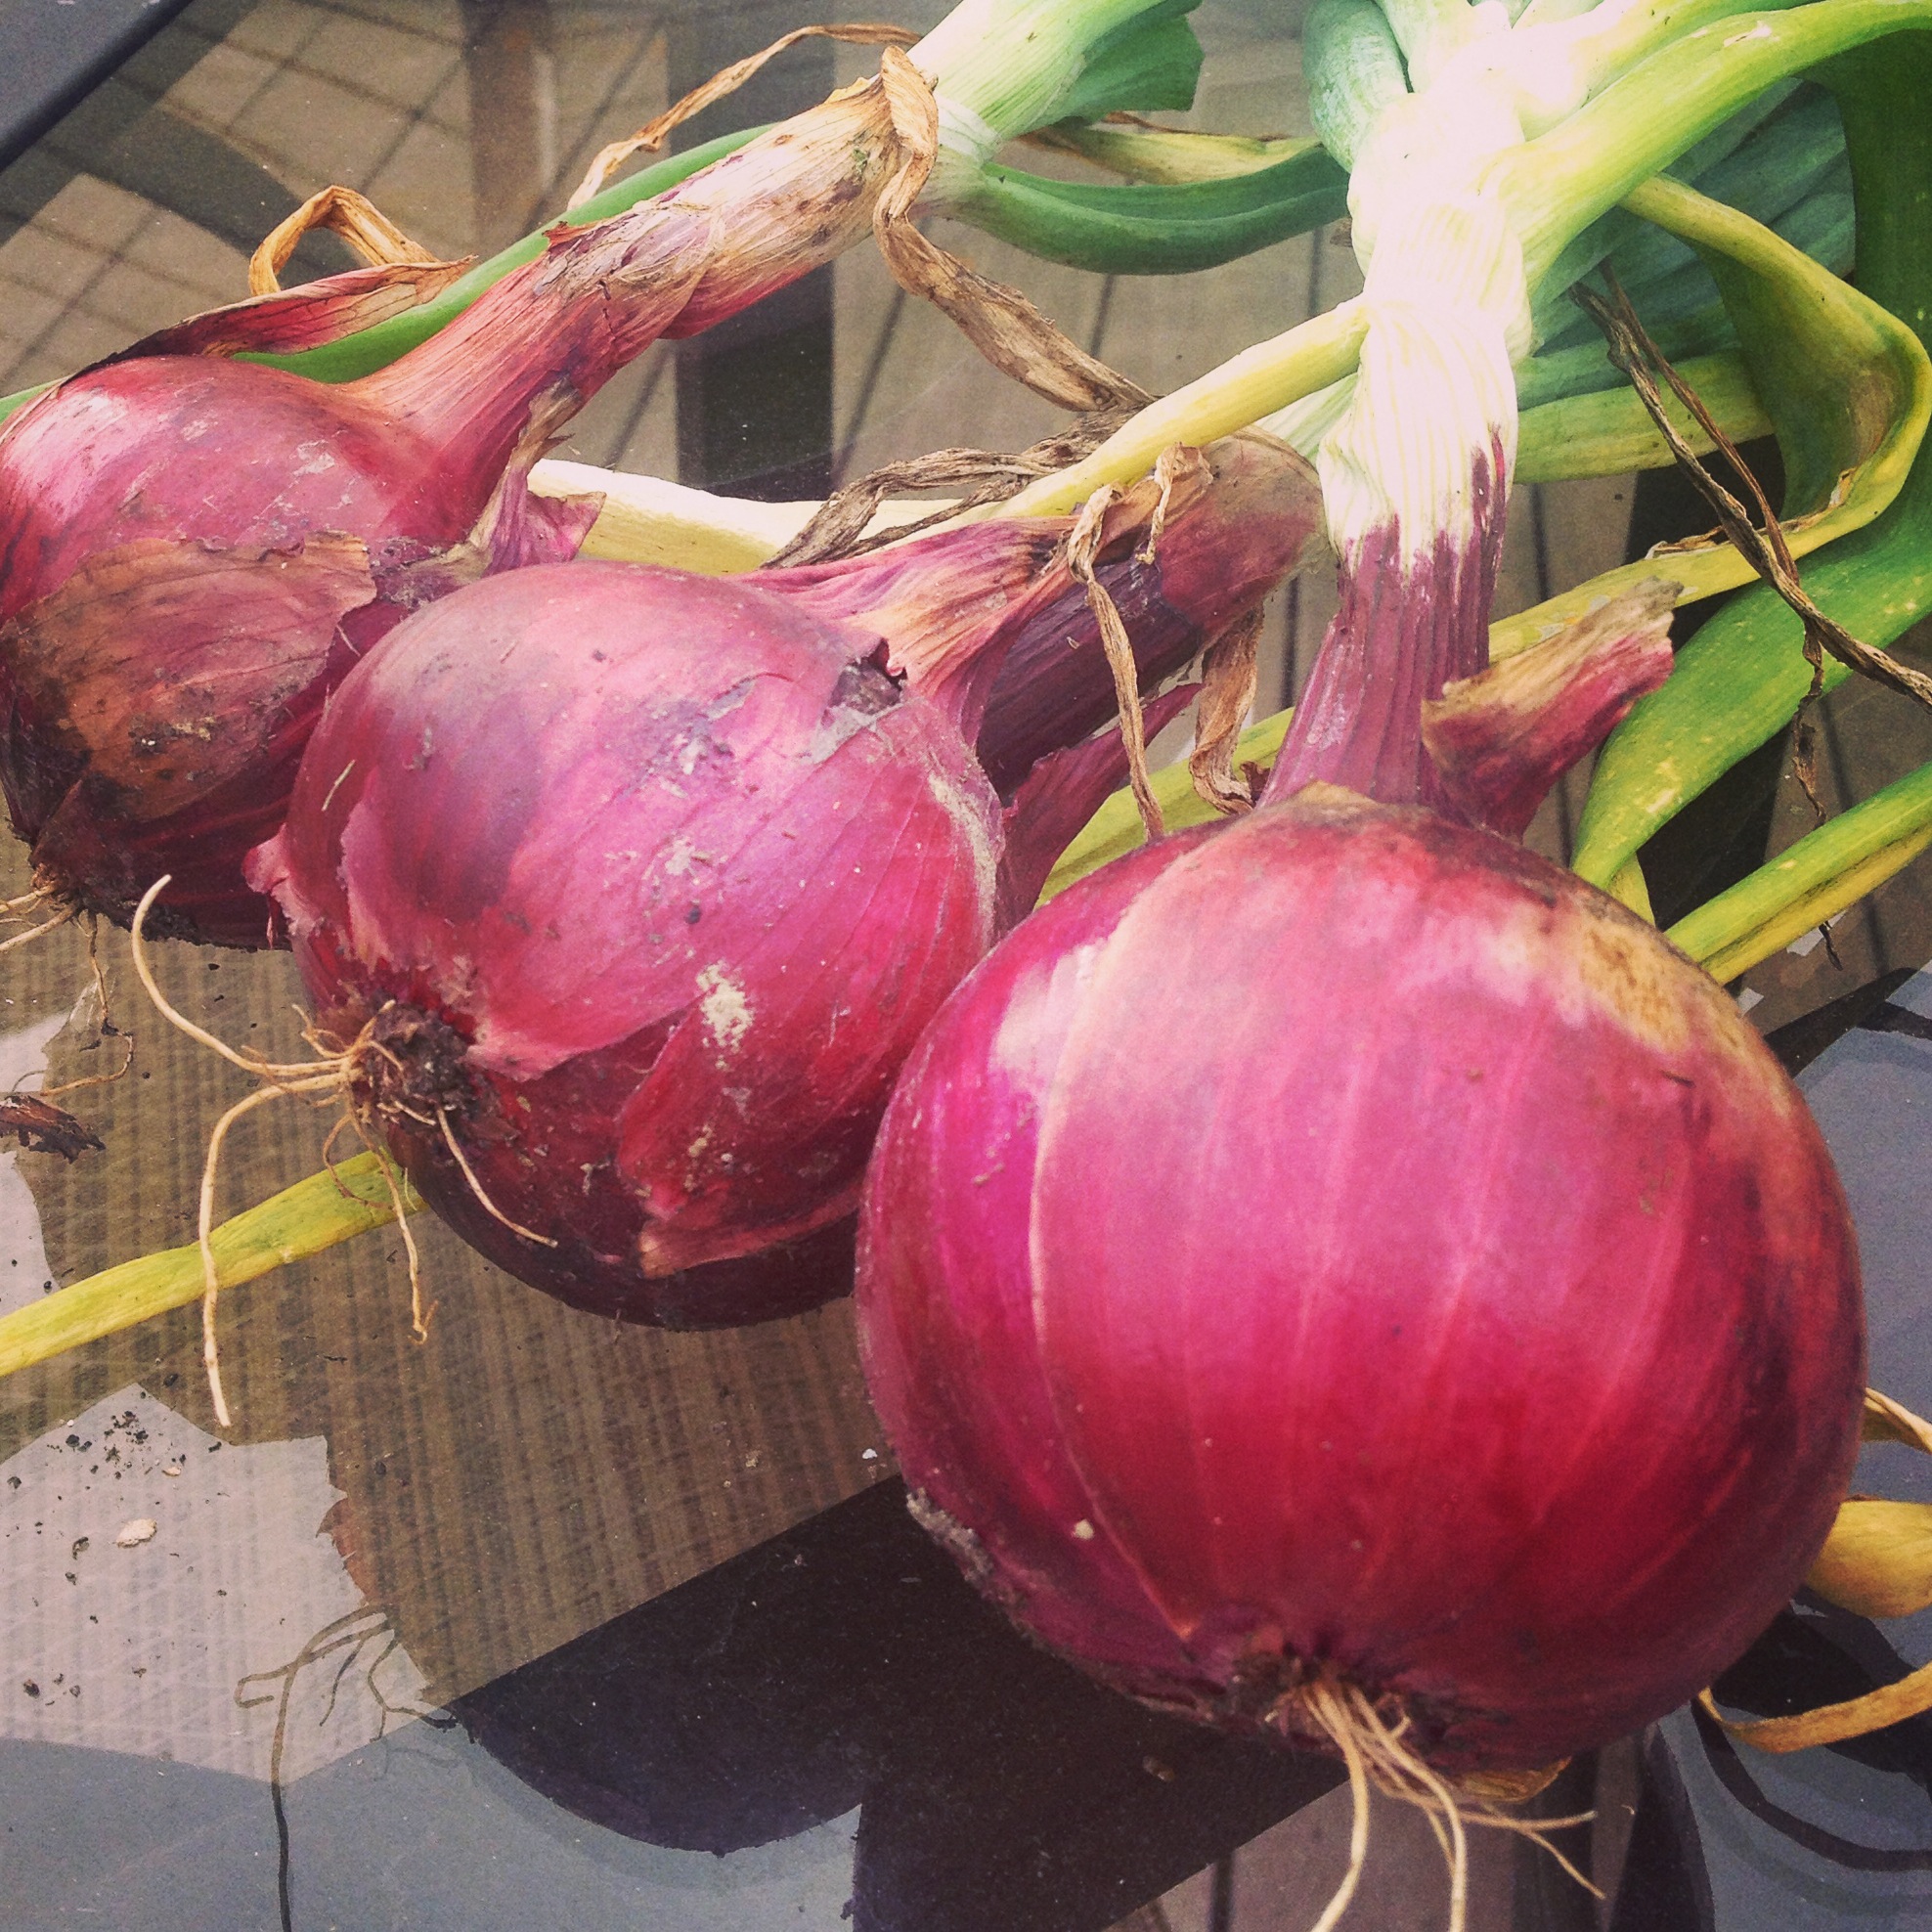 My First Red Onions